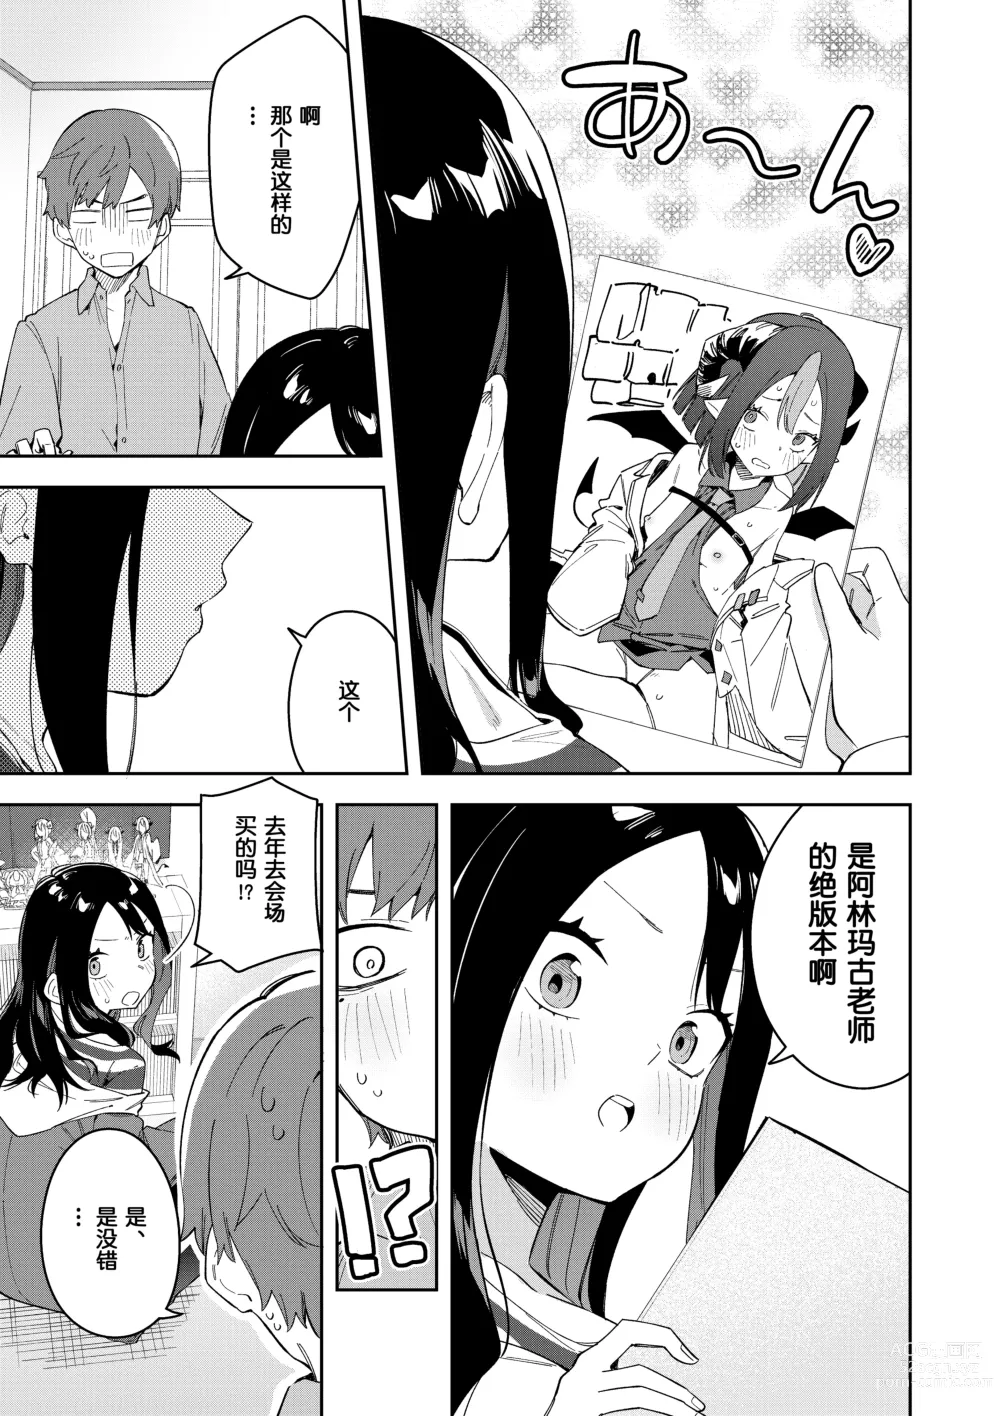 Page 13 of doujinshi 隣人は有名配信者3人目